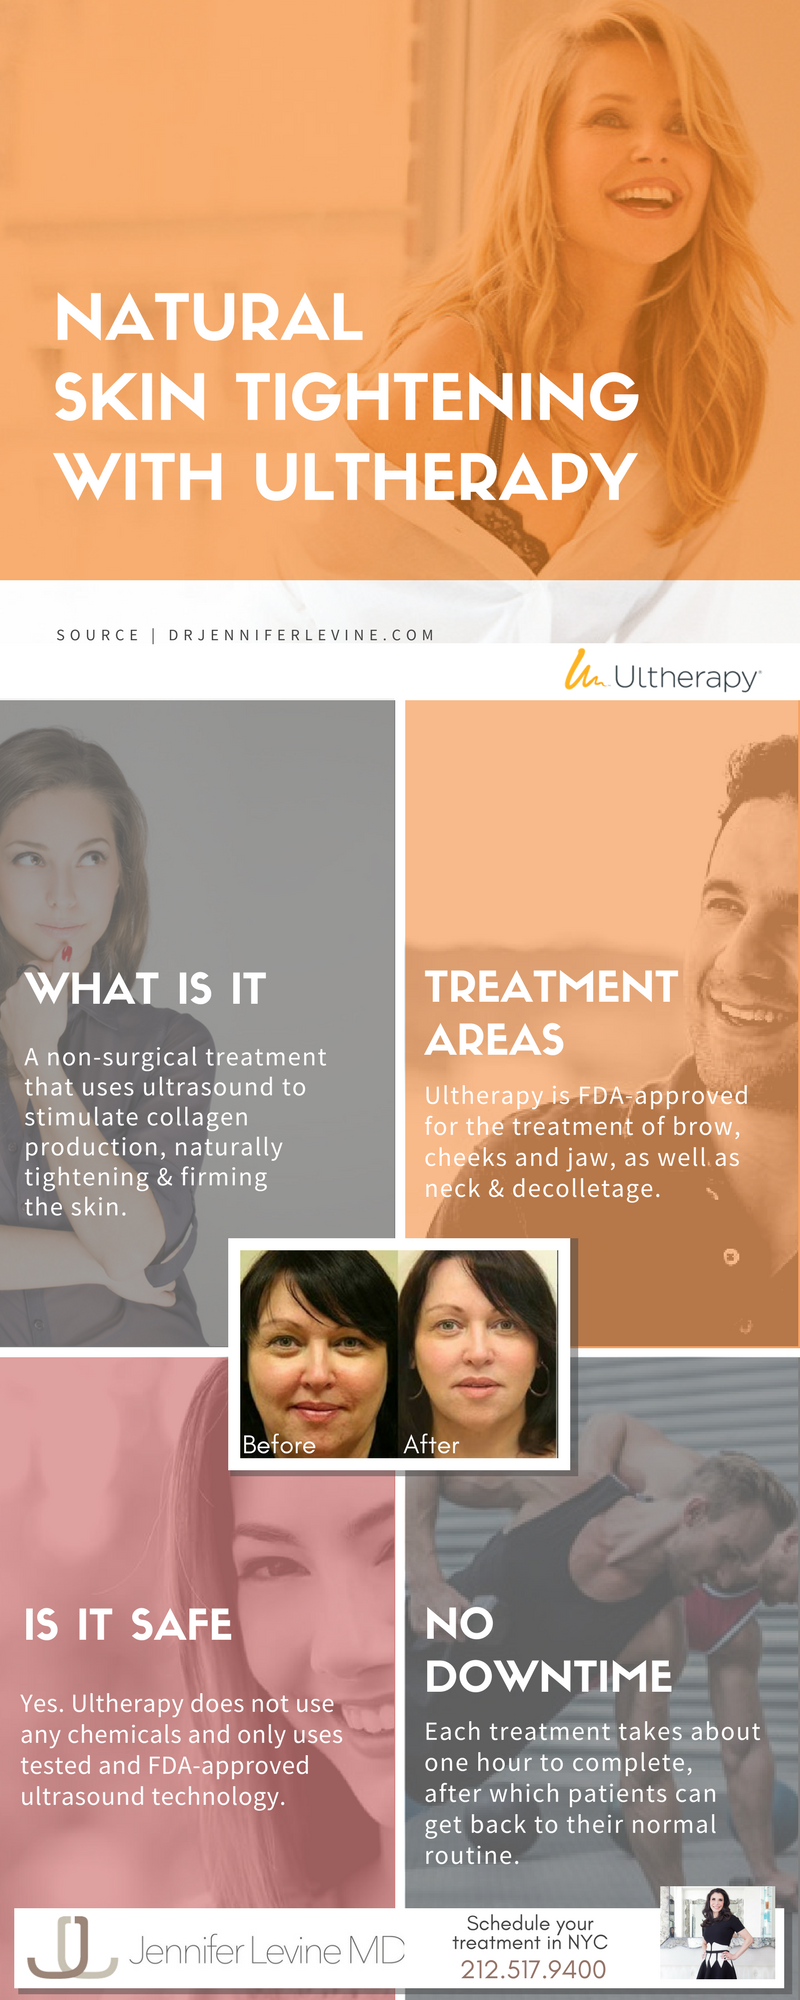 Skin tightening with ultherapy